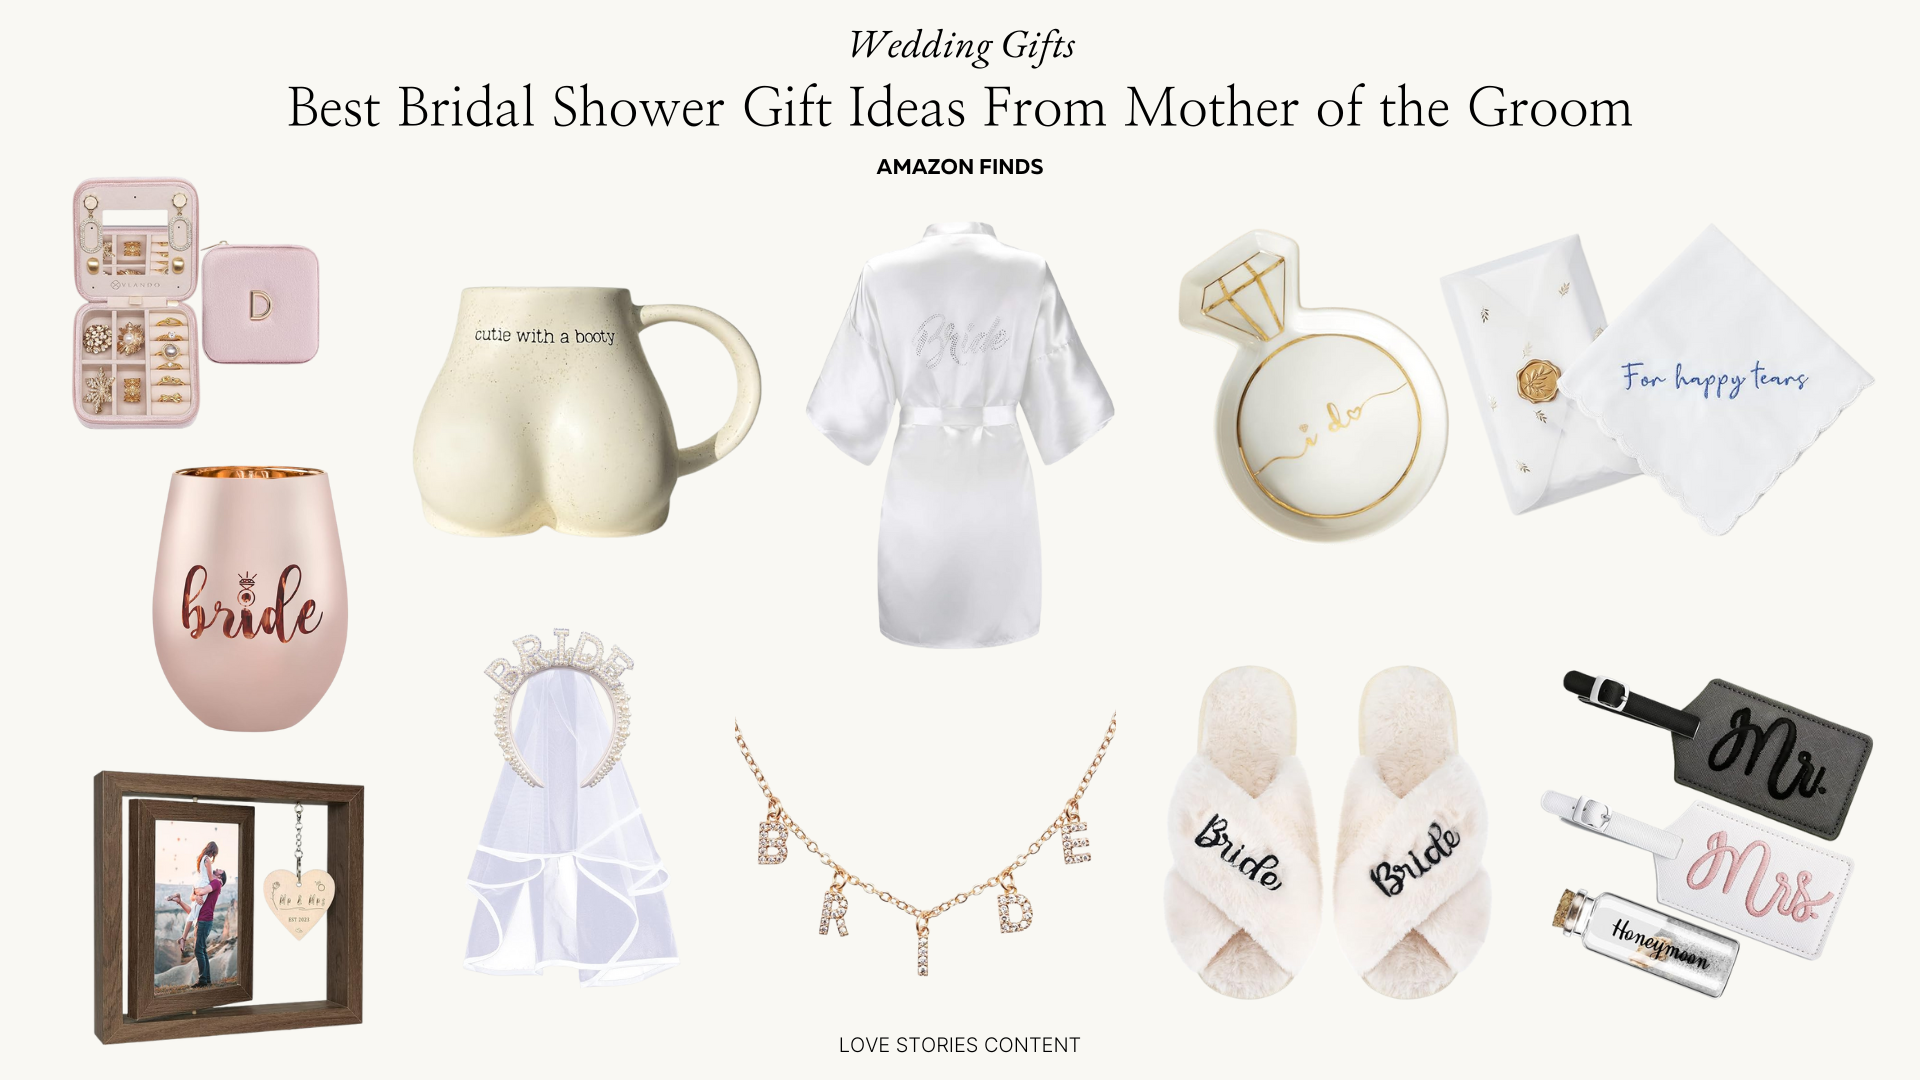 Best Bridal Shower Gift Ideas From Mother of the Groom